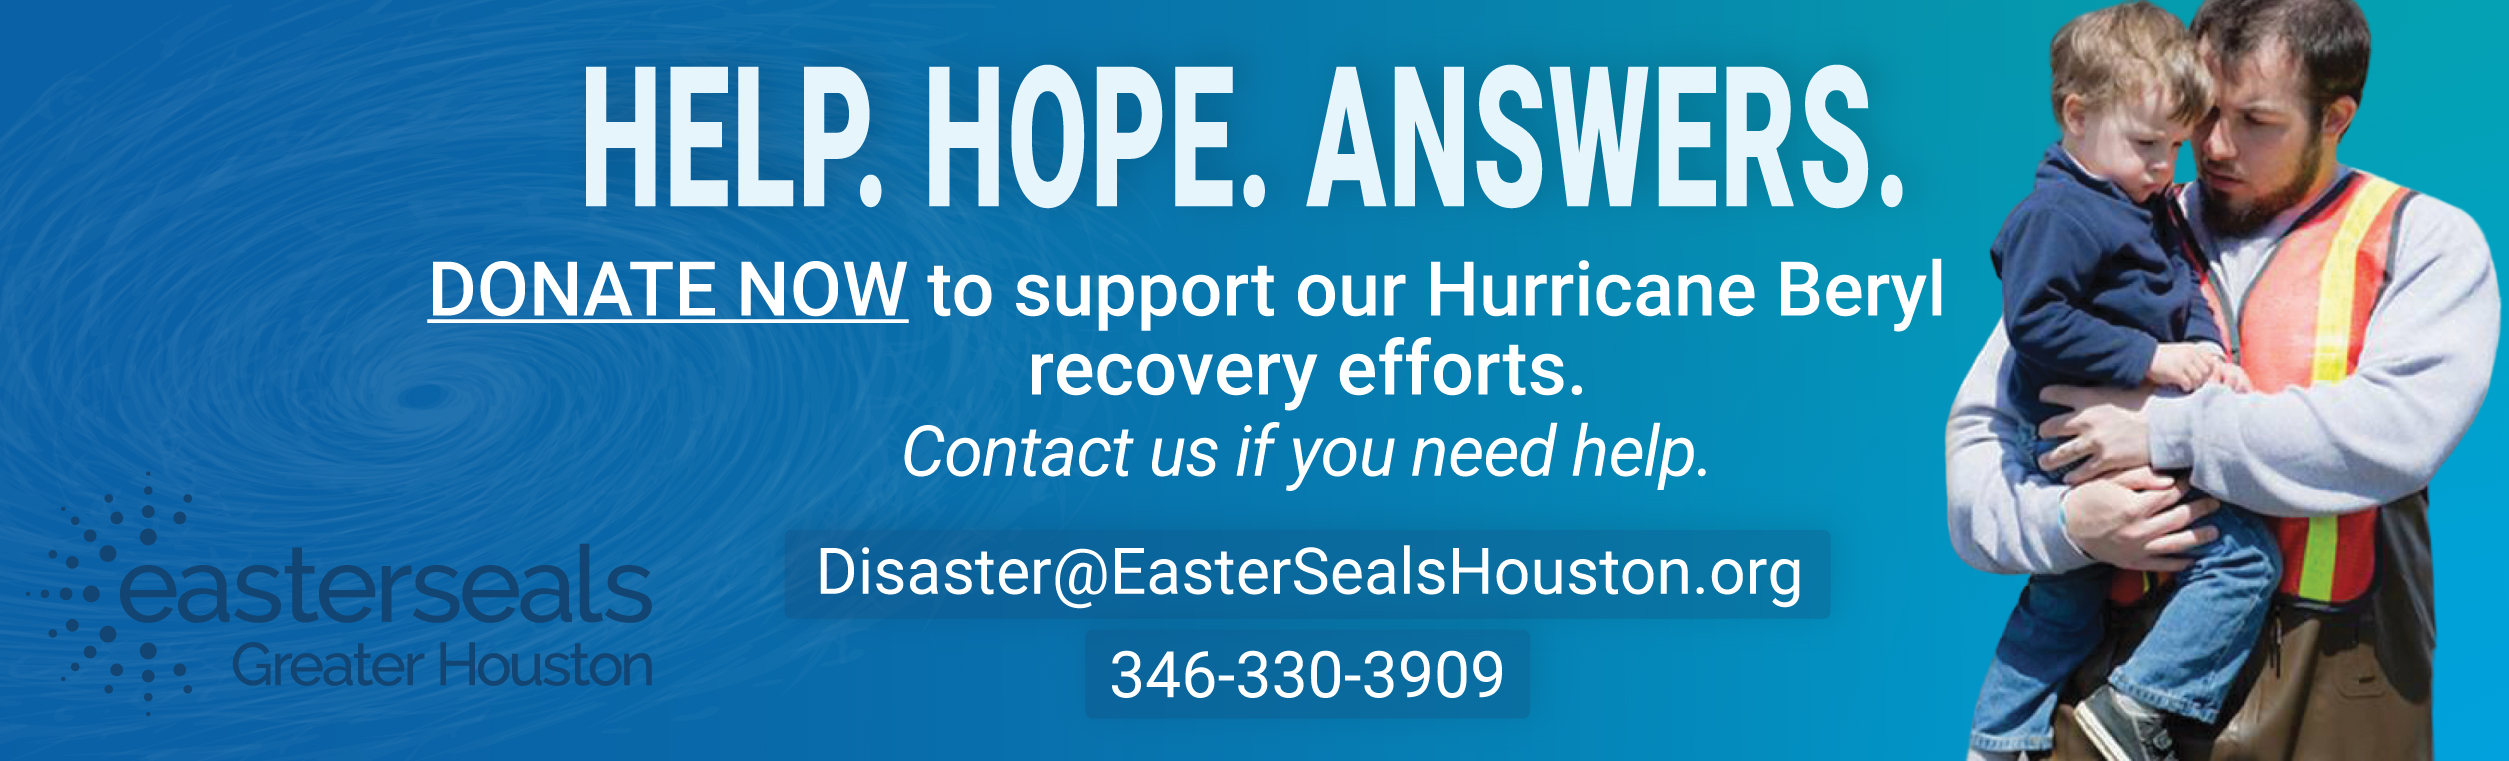 Help us help our community recover after Hurricane Beryl. Donate today!